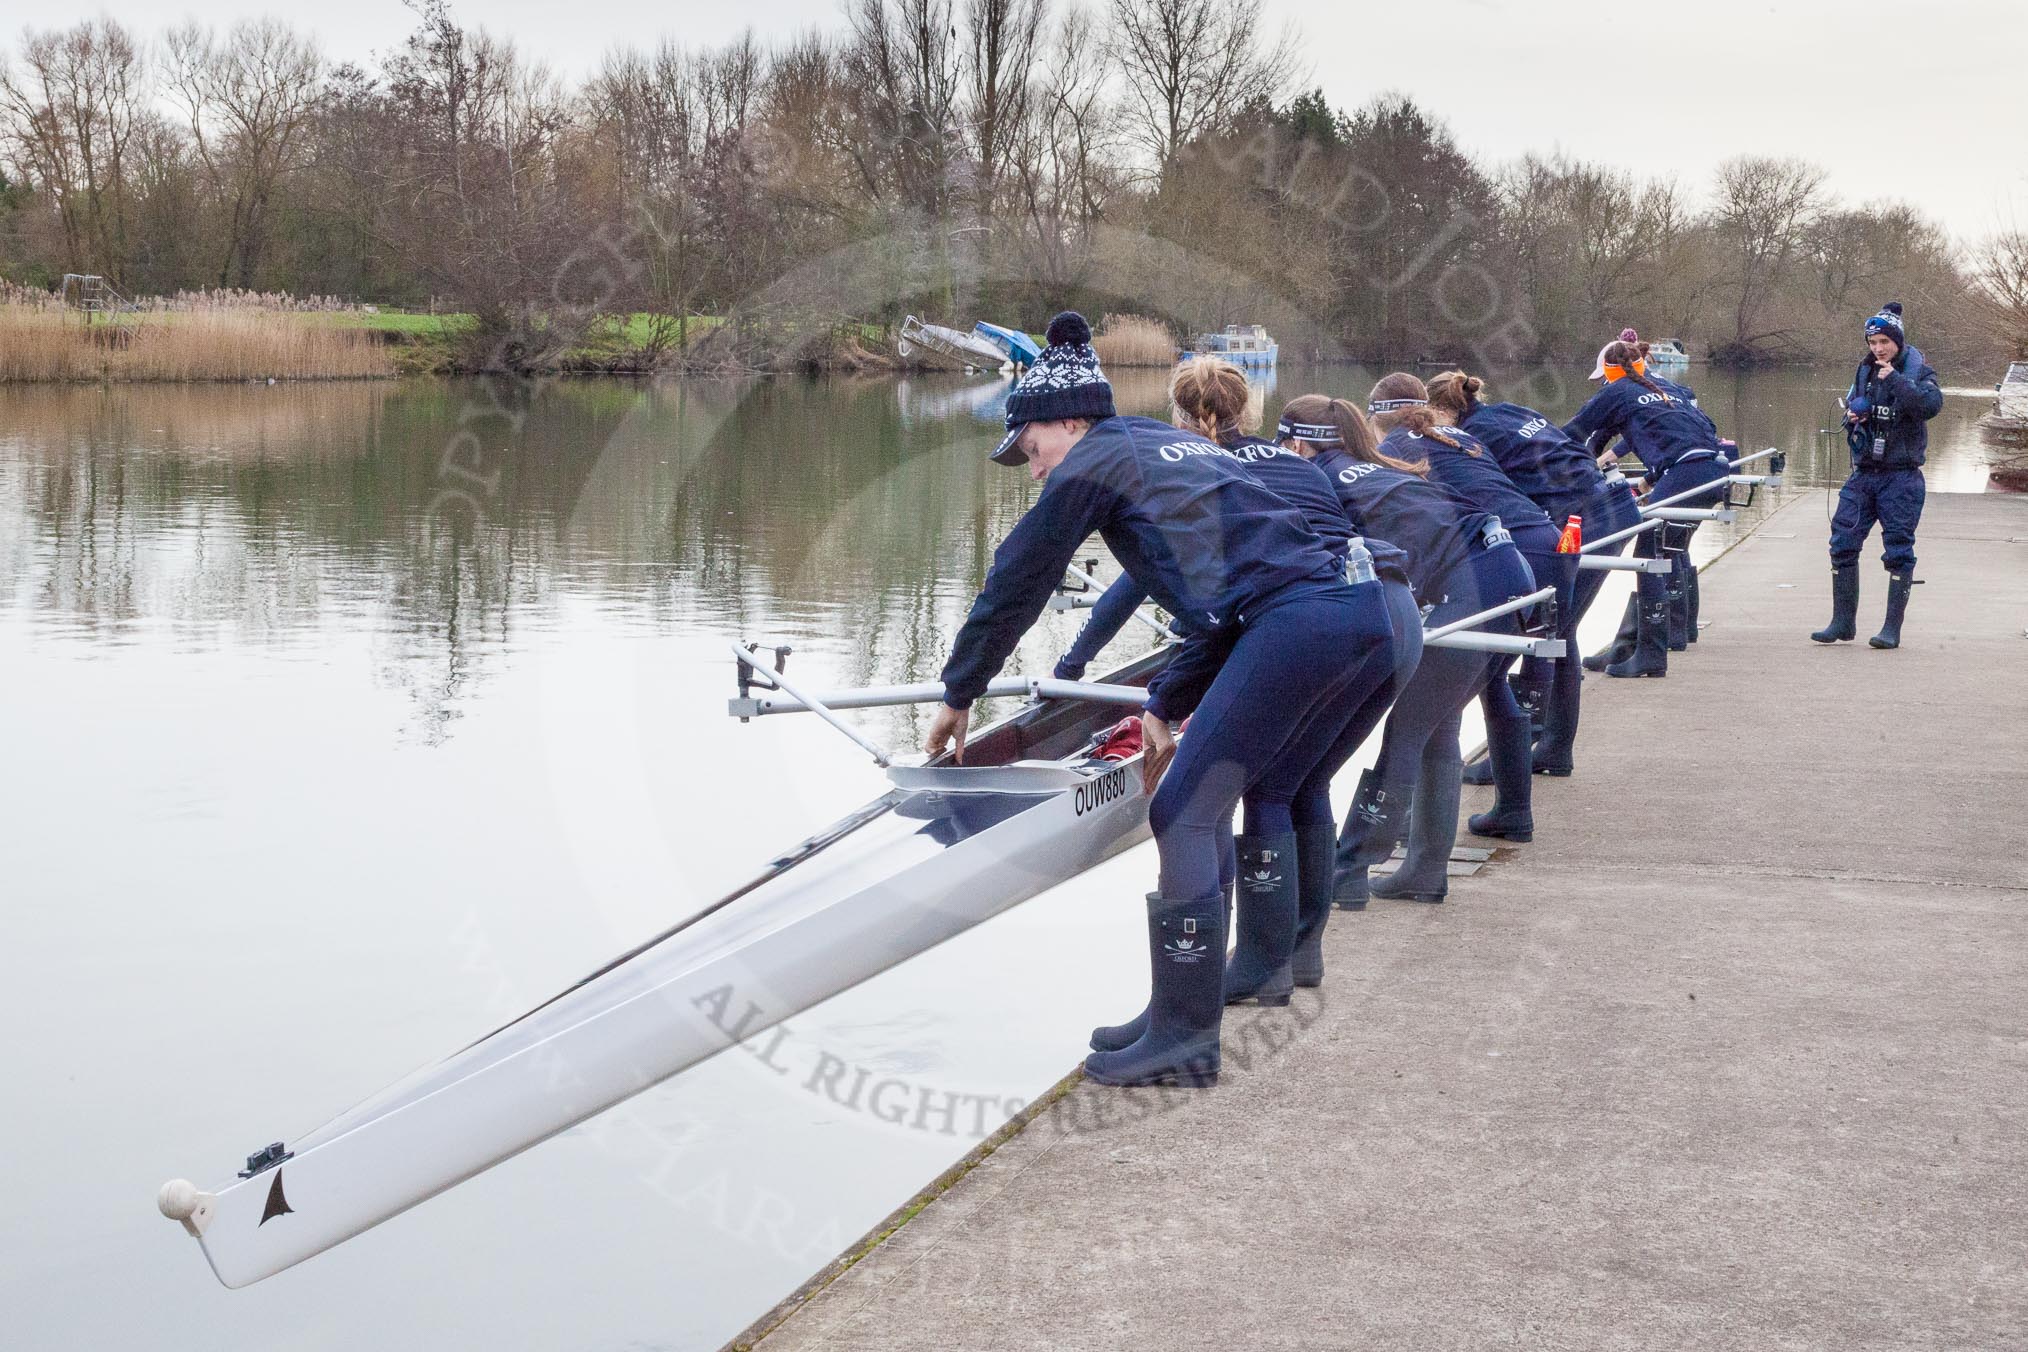 The Boat Race season 2016 - OUWBC training Wallingford: The crew of Osiris, the OUWBC reserve boat, getting readu for their training session.
River Thames,
Wallingford,
Oxfordshire,

on 29 February 2016 at 15:16, image #32